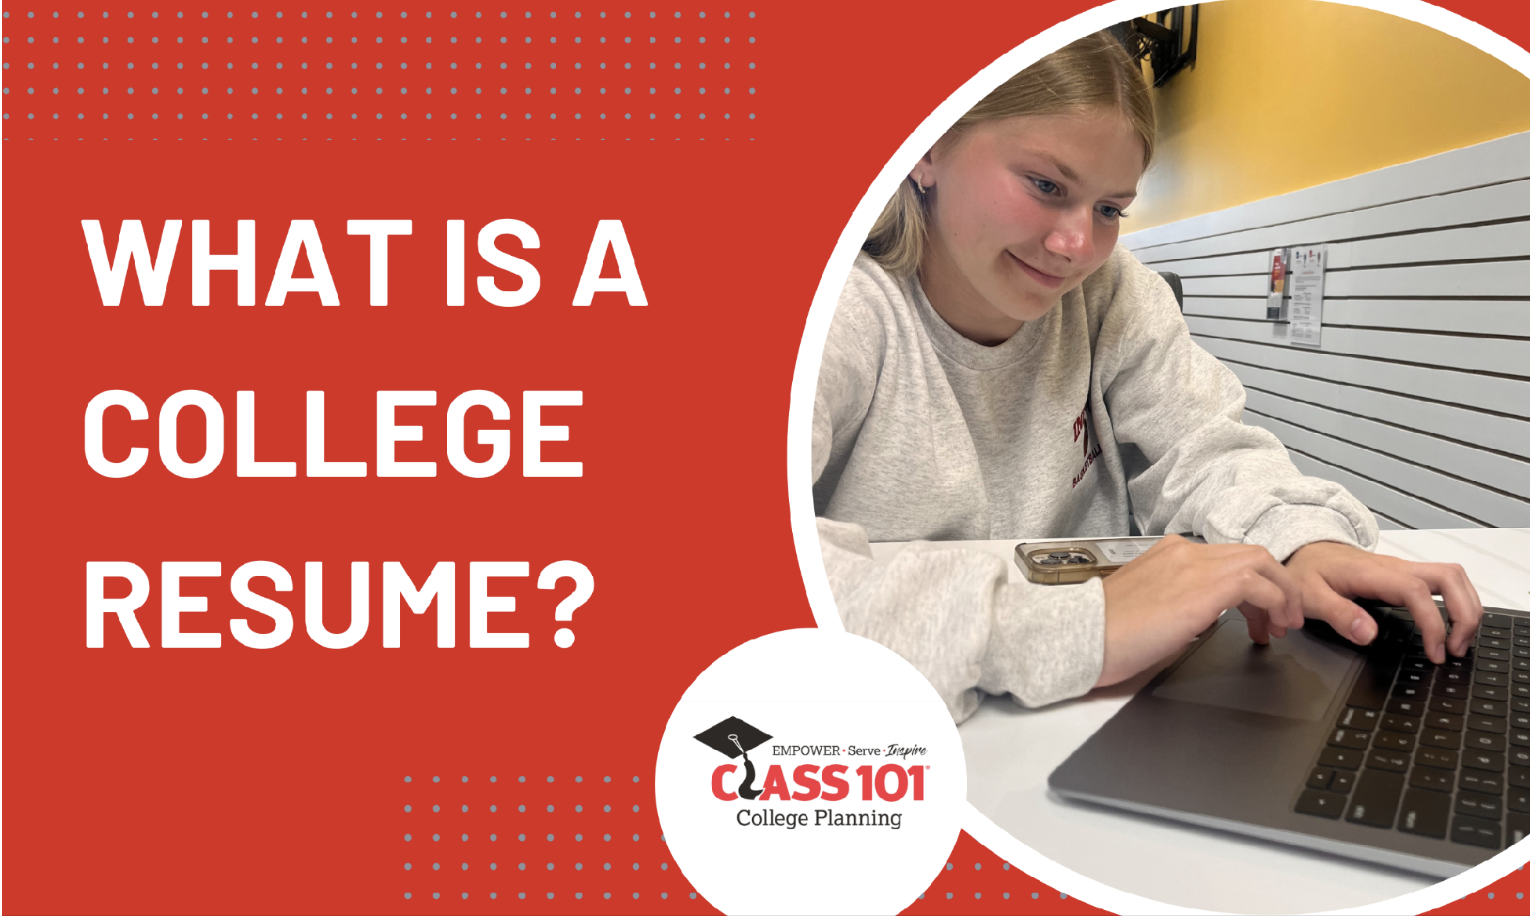 What is a college resume?